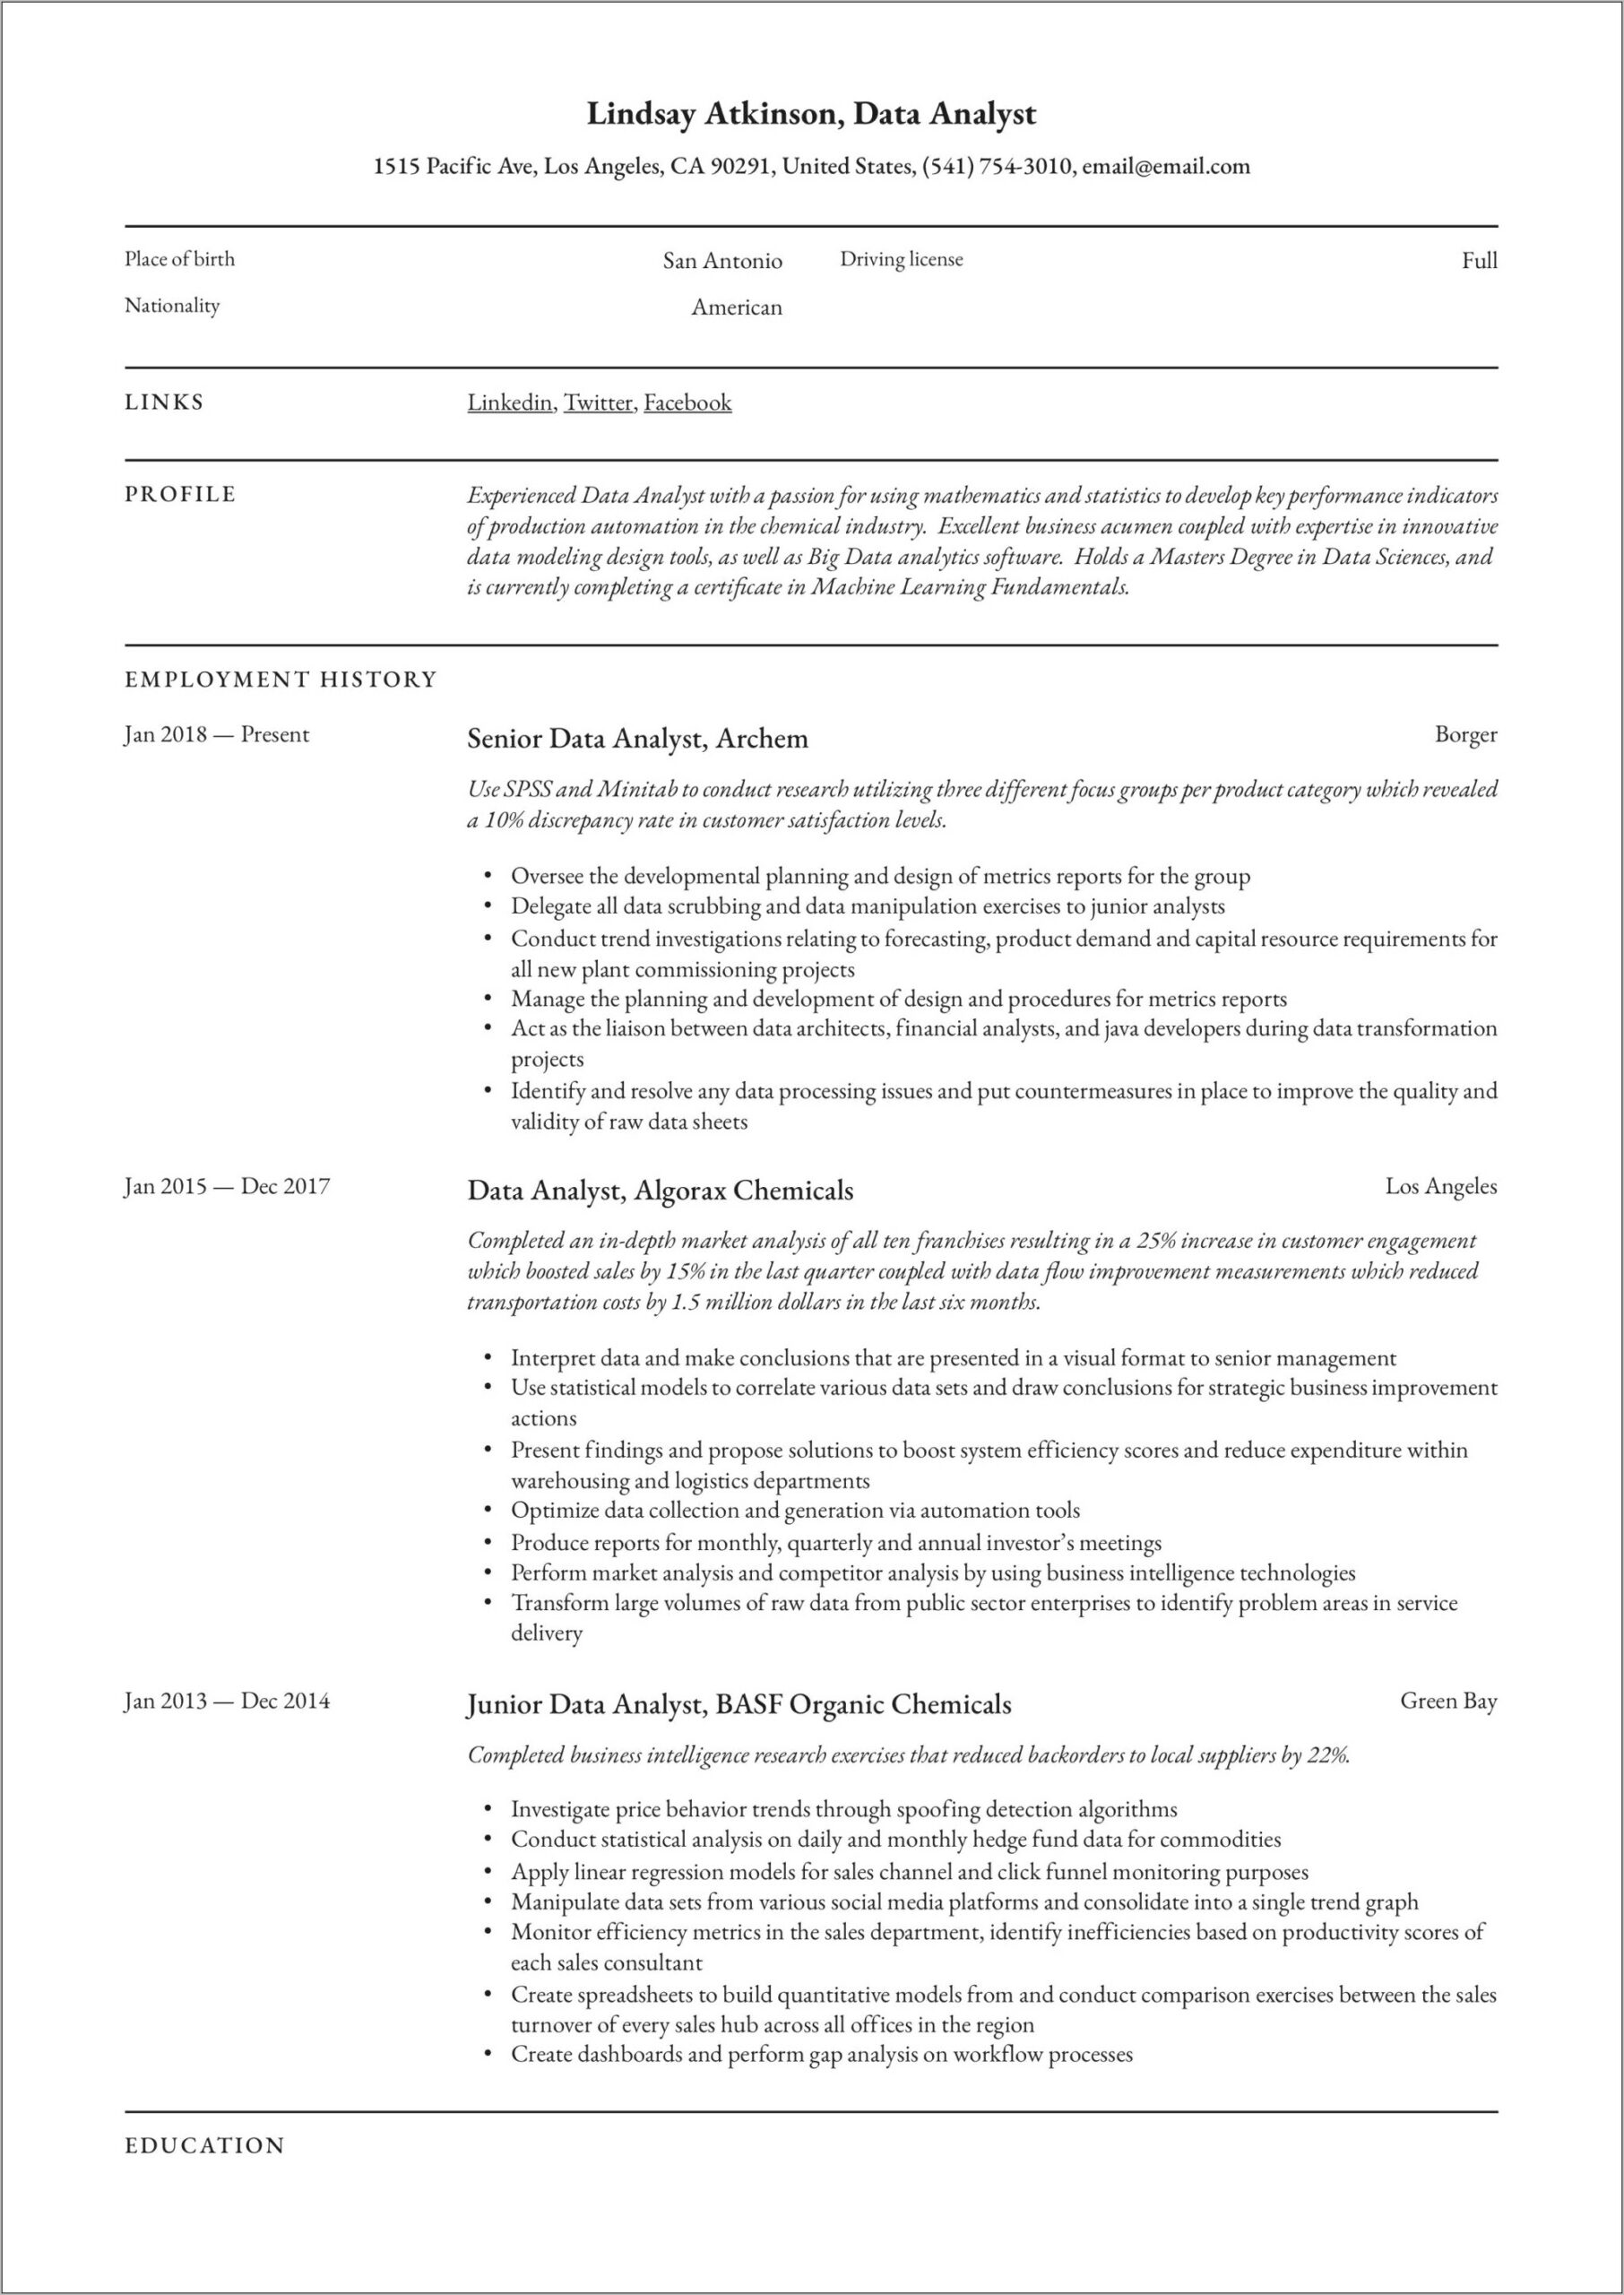 Data Science With Python Resume Example